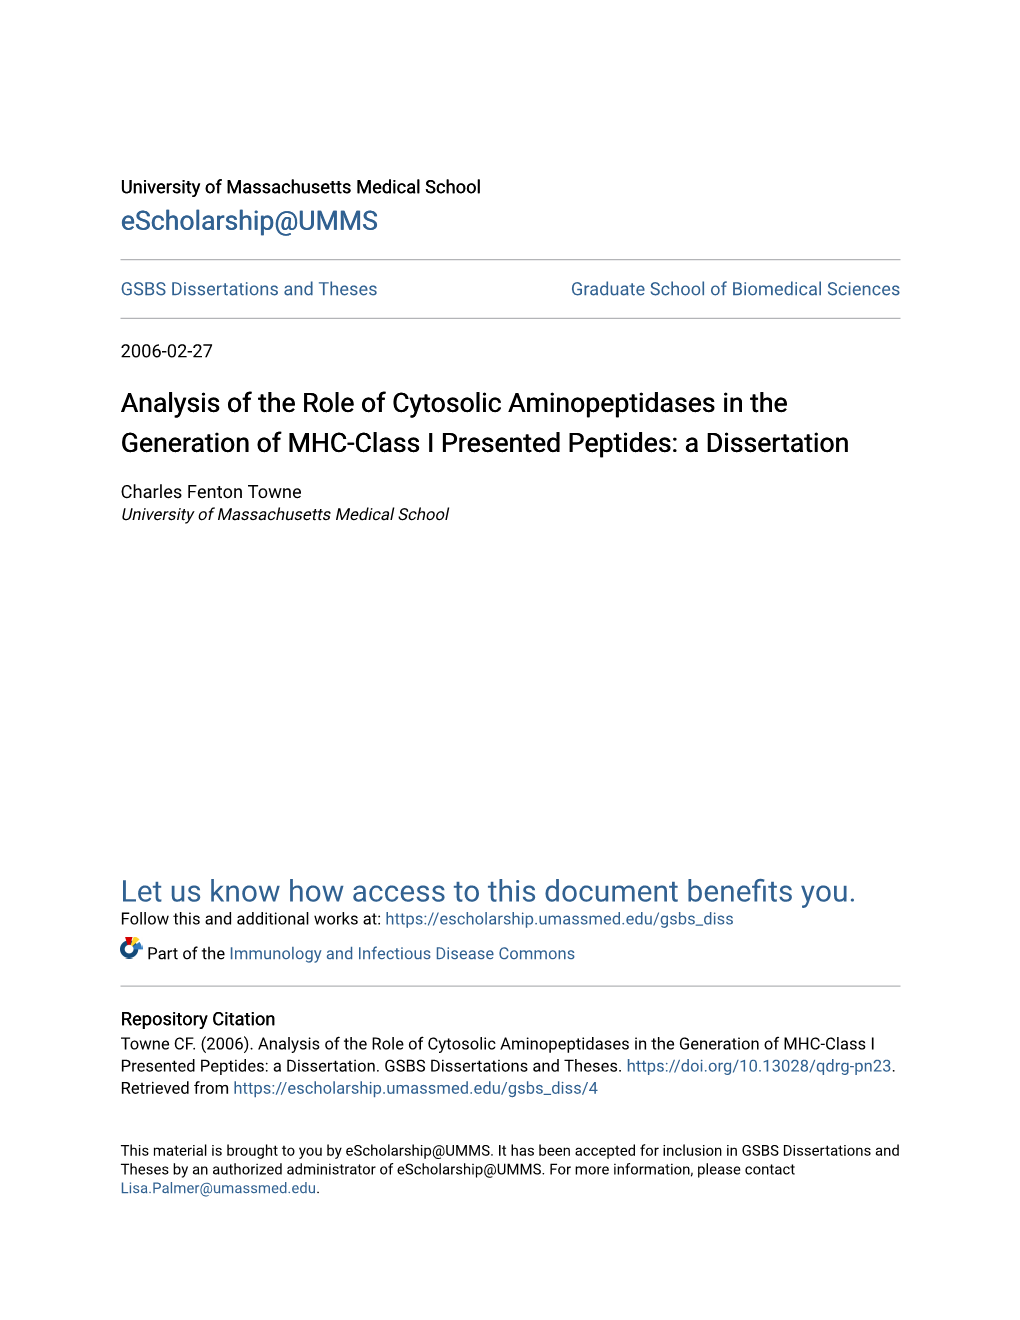 Analysis of the Role of Cytosolic Aminopeptidases in the Generation of MHC-Class I Presented Peptides: a Dissertation